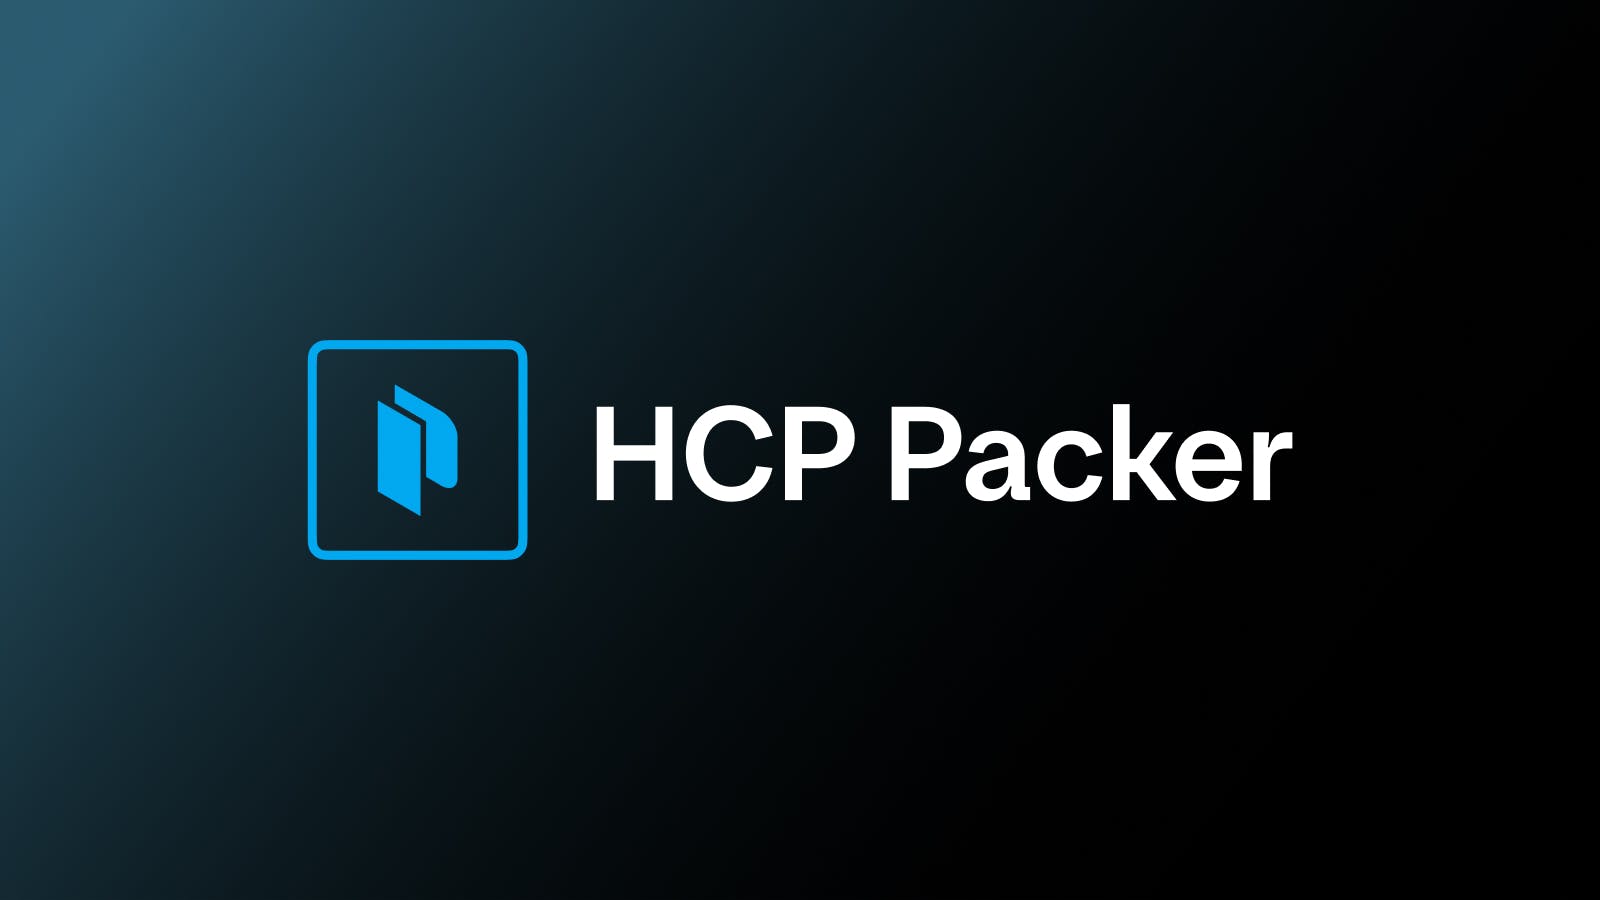 HCP Packer Is Now Generally Available